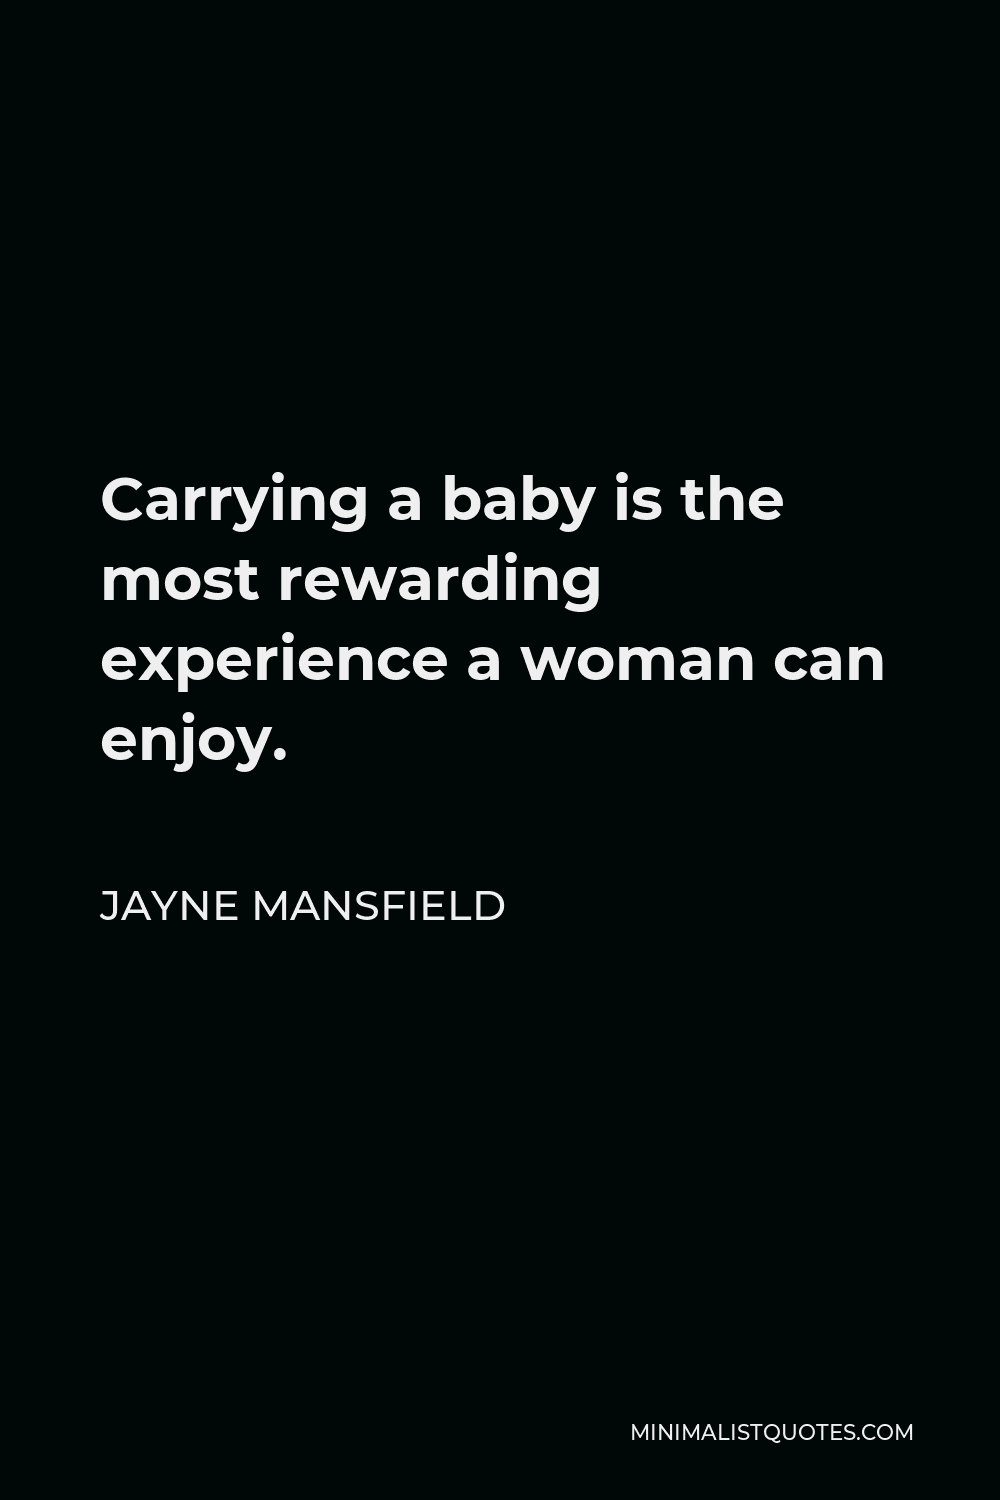 Jayne Mansfield Quote: “A 41-inch bust and a lot of perseverance will get  you more